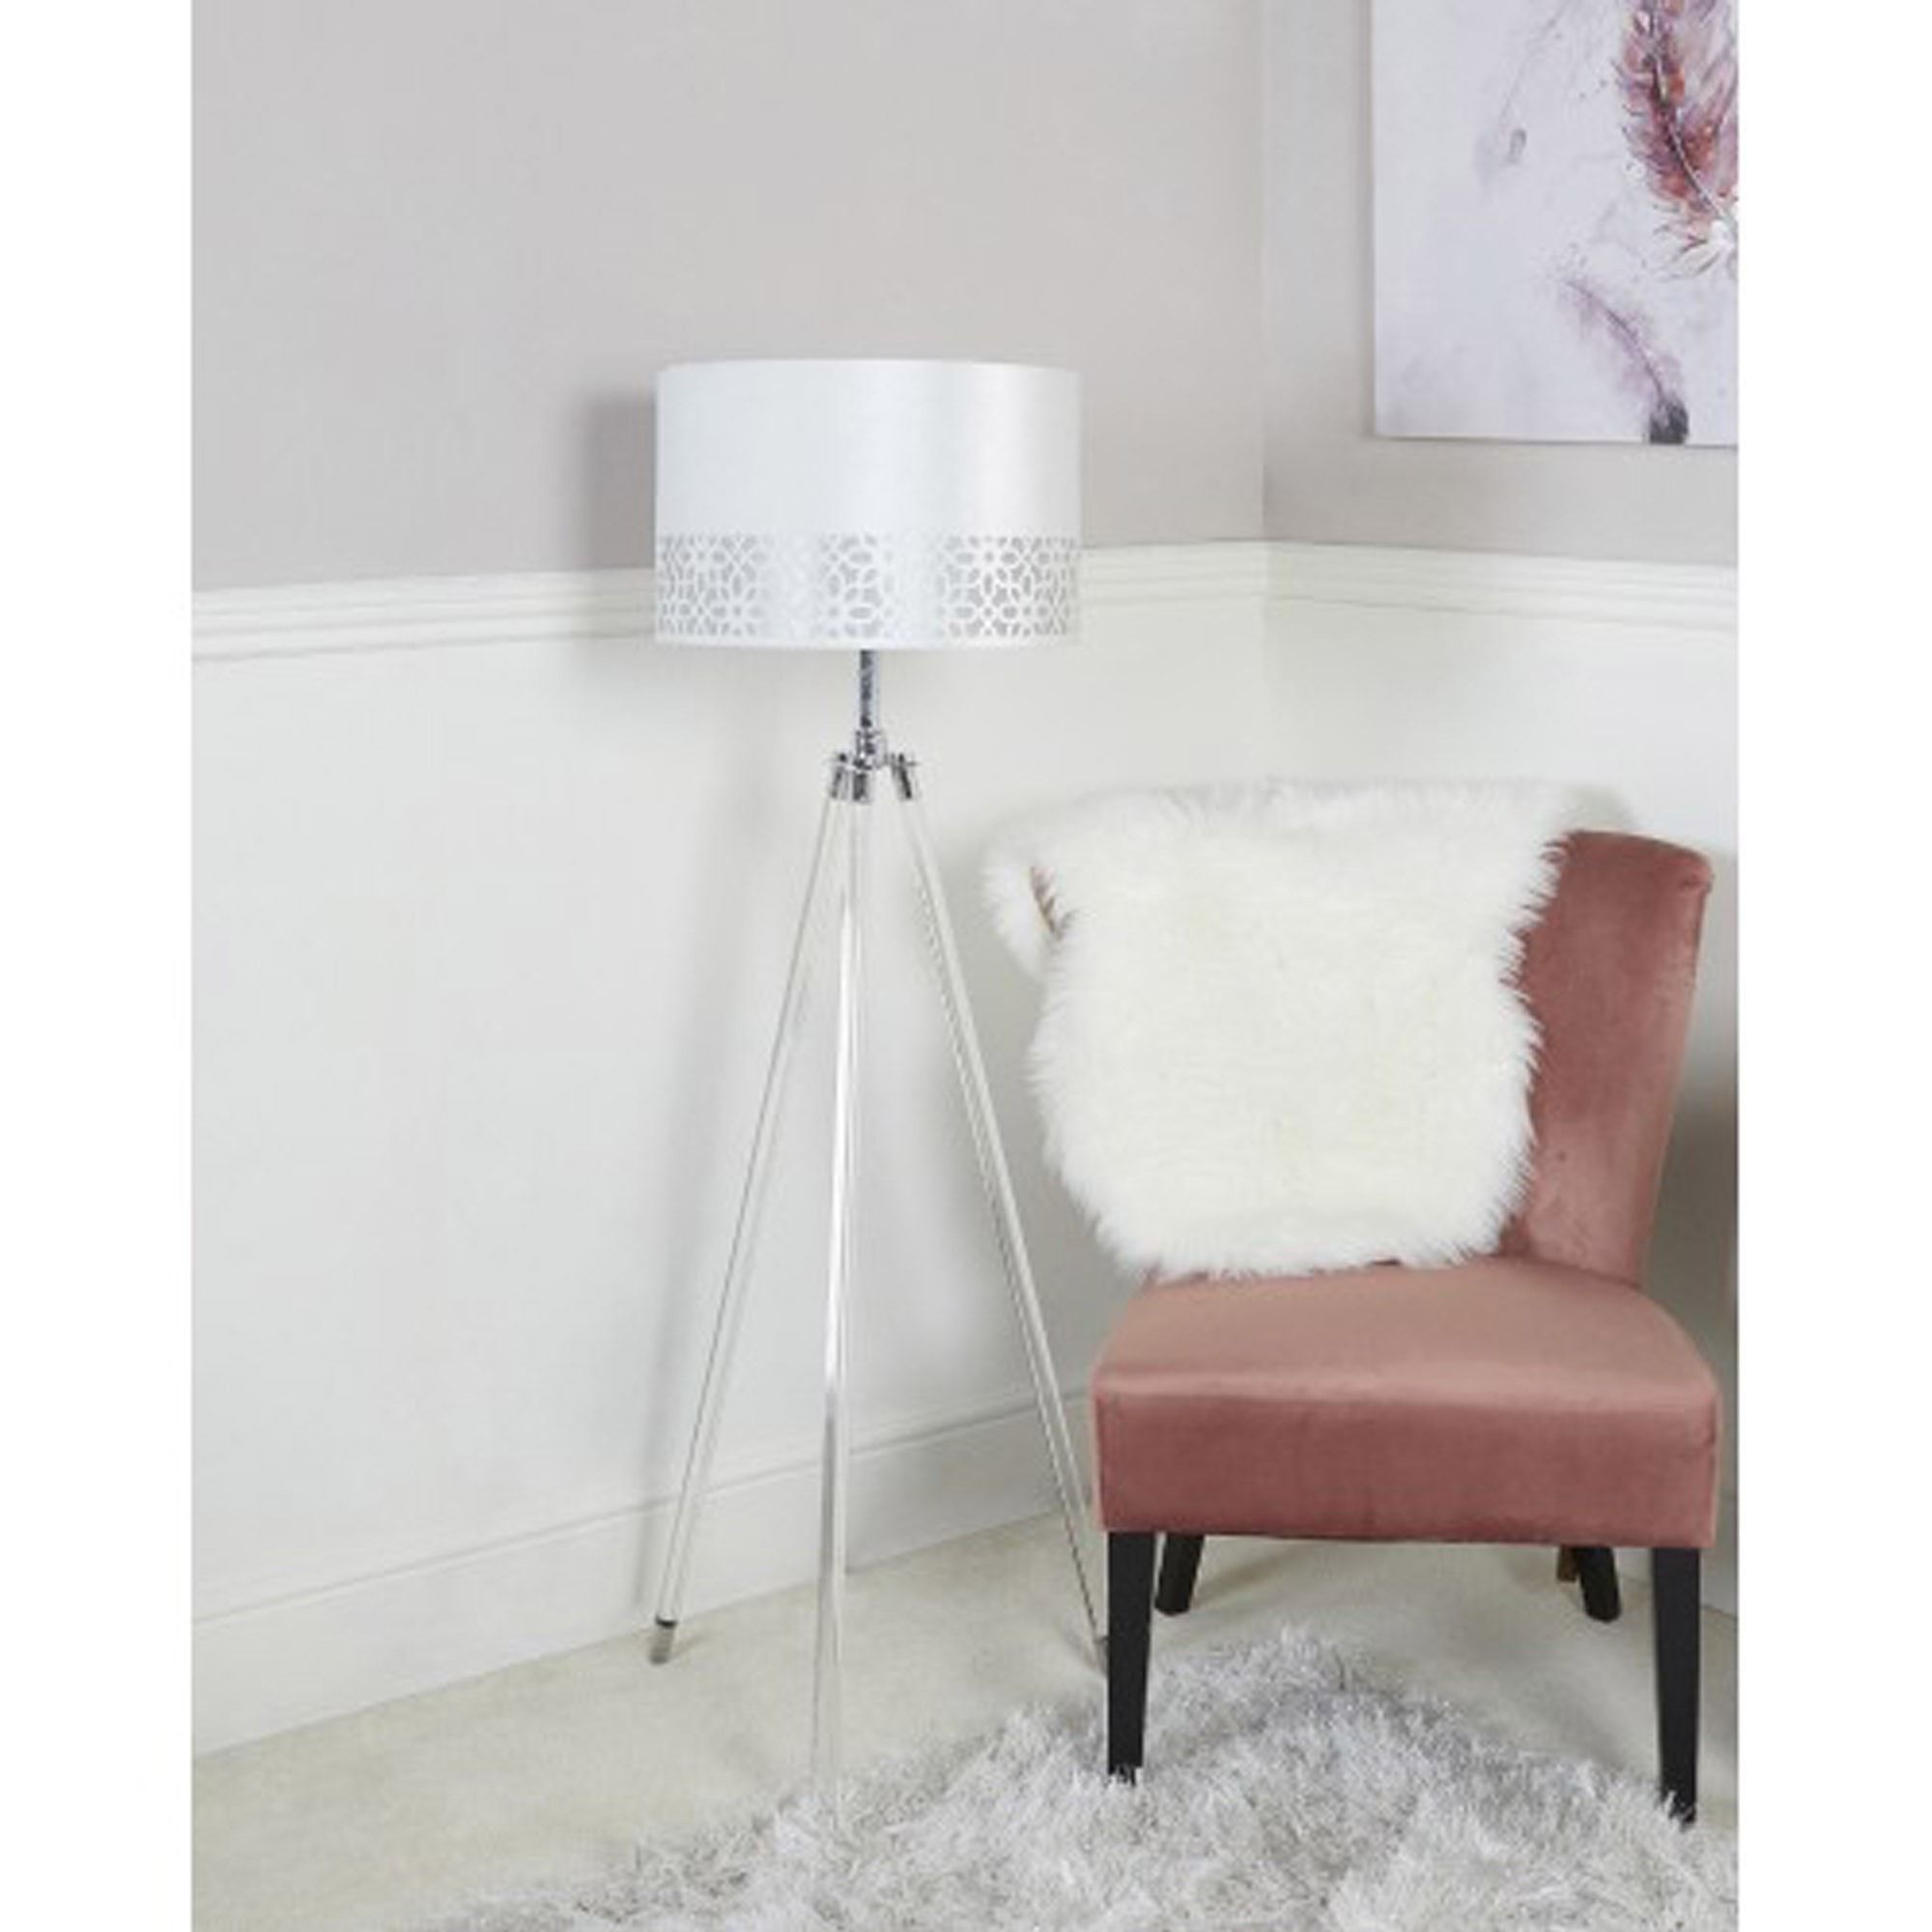 Acrylic Standing Lamps Within Recent Acrylic Tripod Floor Lamp With White & Silver Shade (View 1 of 10)